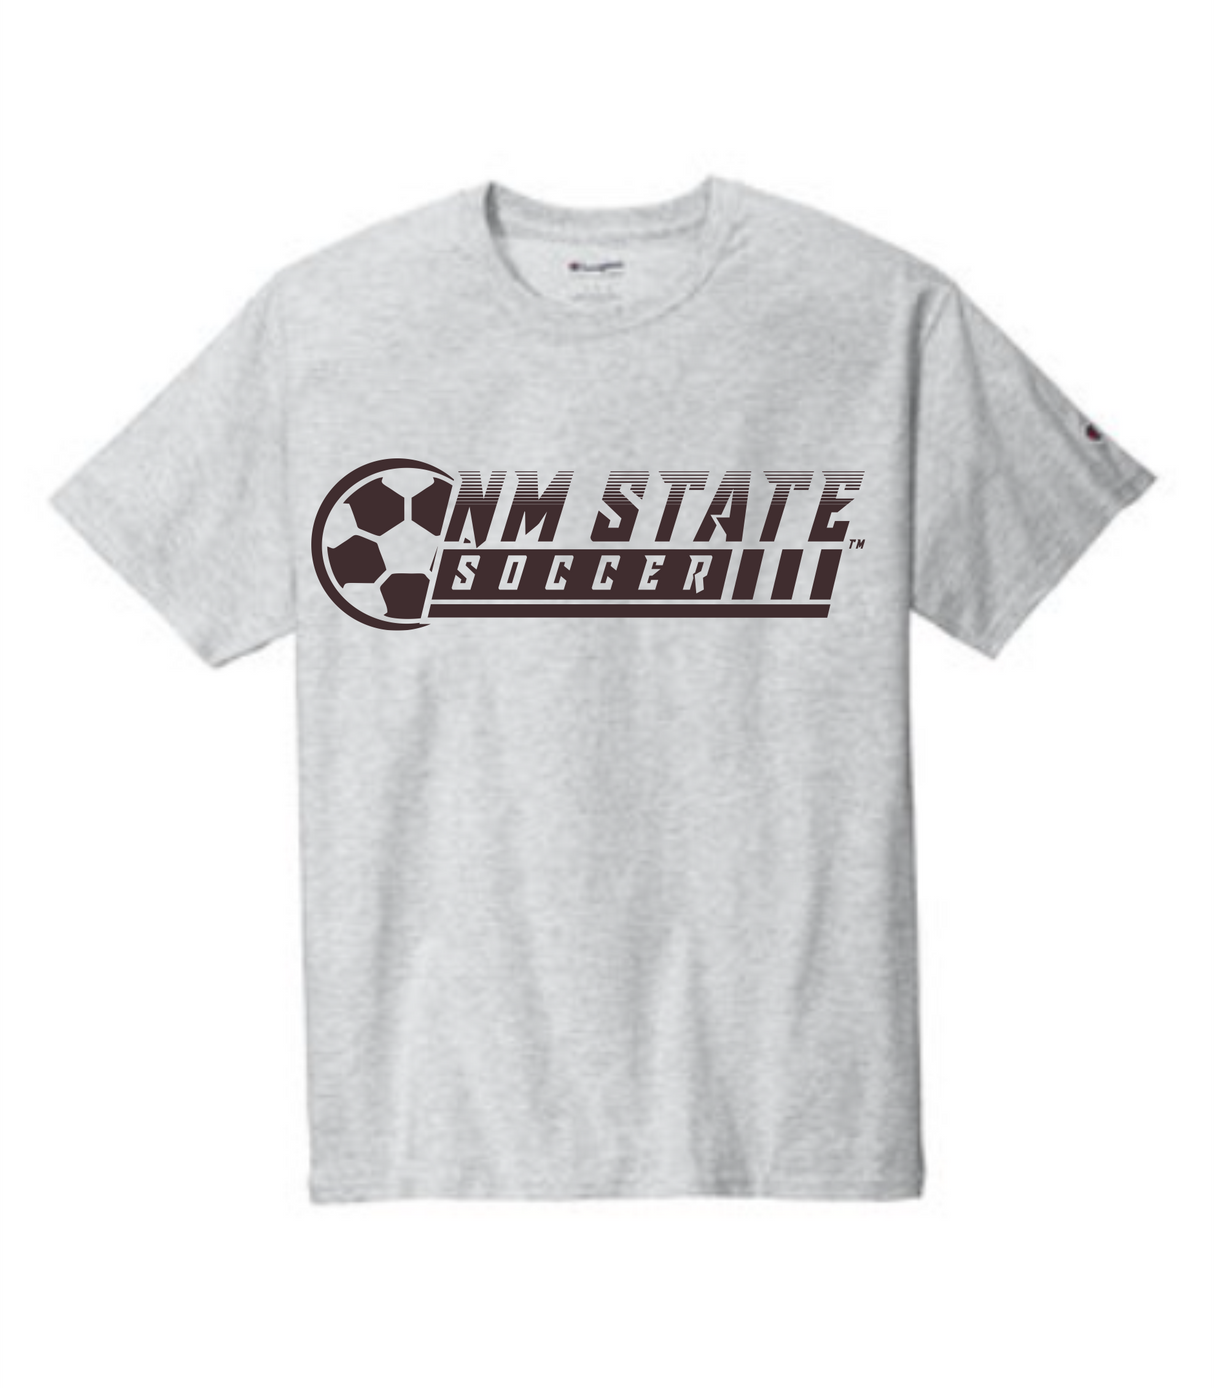 NM State Soccer Champion Cotton Short Sleeve Tee